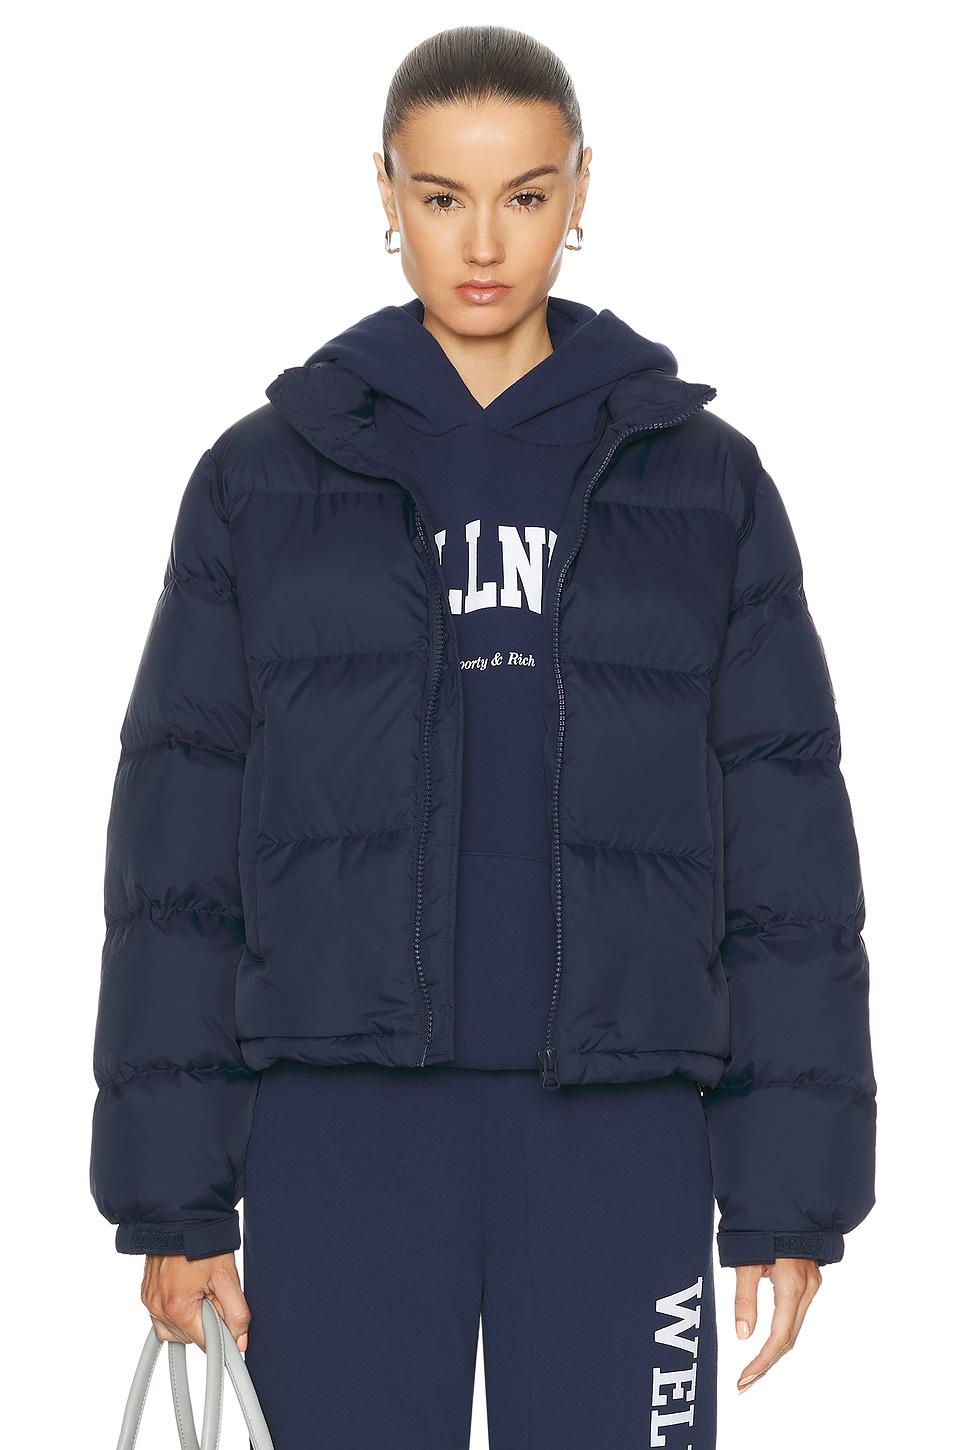 Image 1 of Sporty & Rich Crown LA Puffer Jacket in Navy & Cream